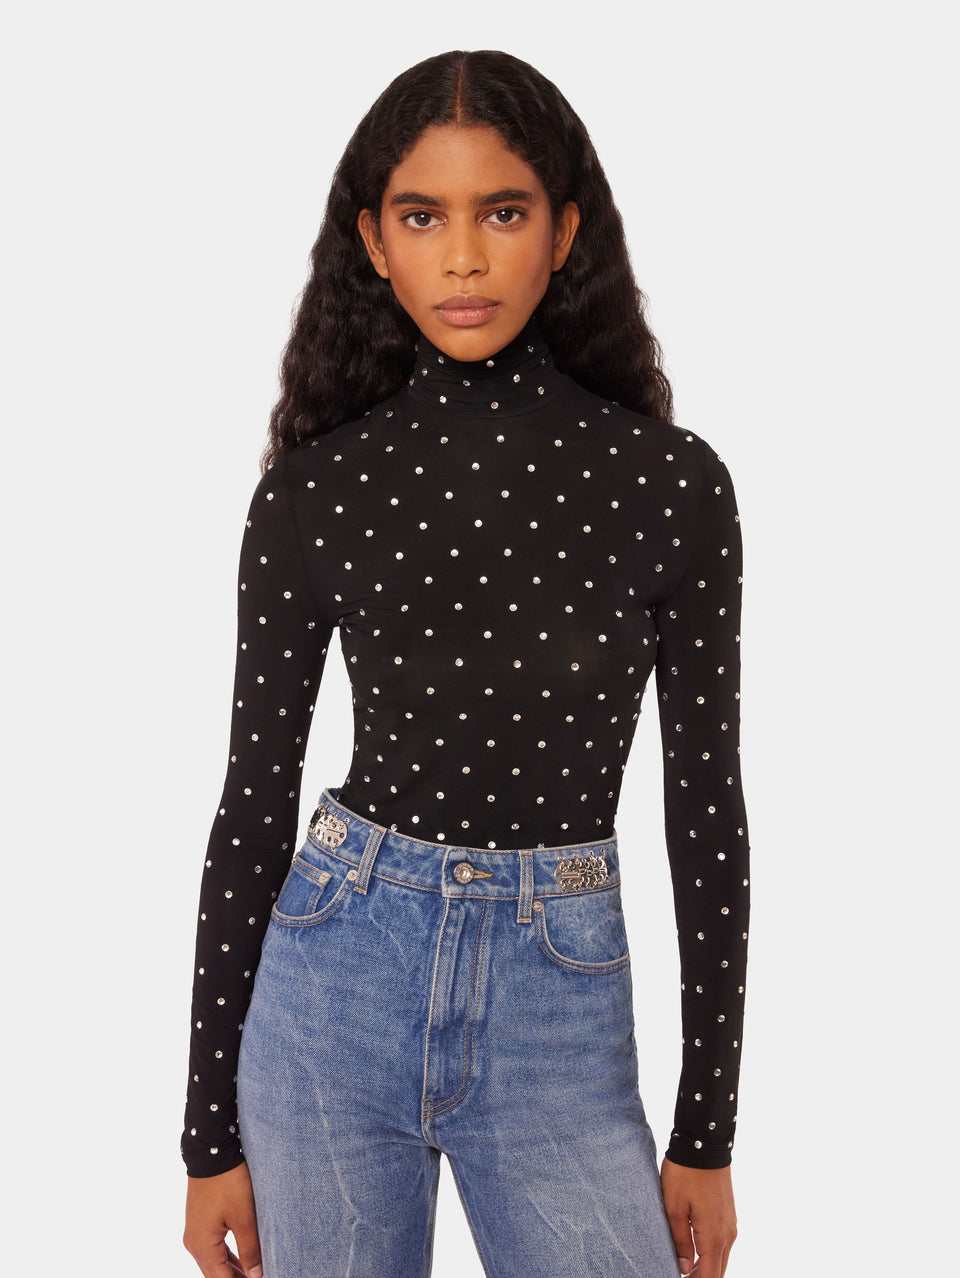 Second skin turtleneck jersey top with crystals